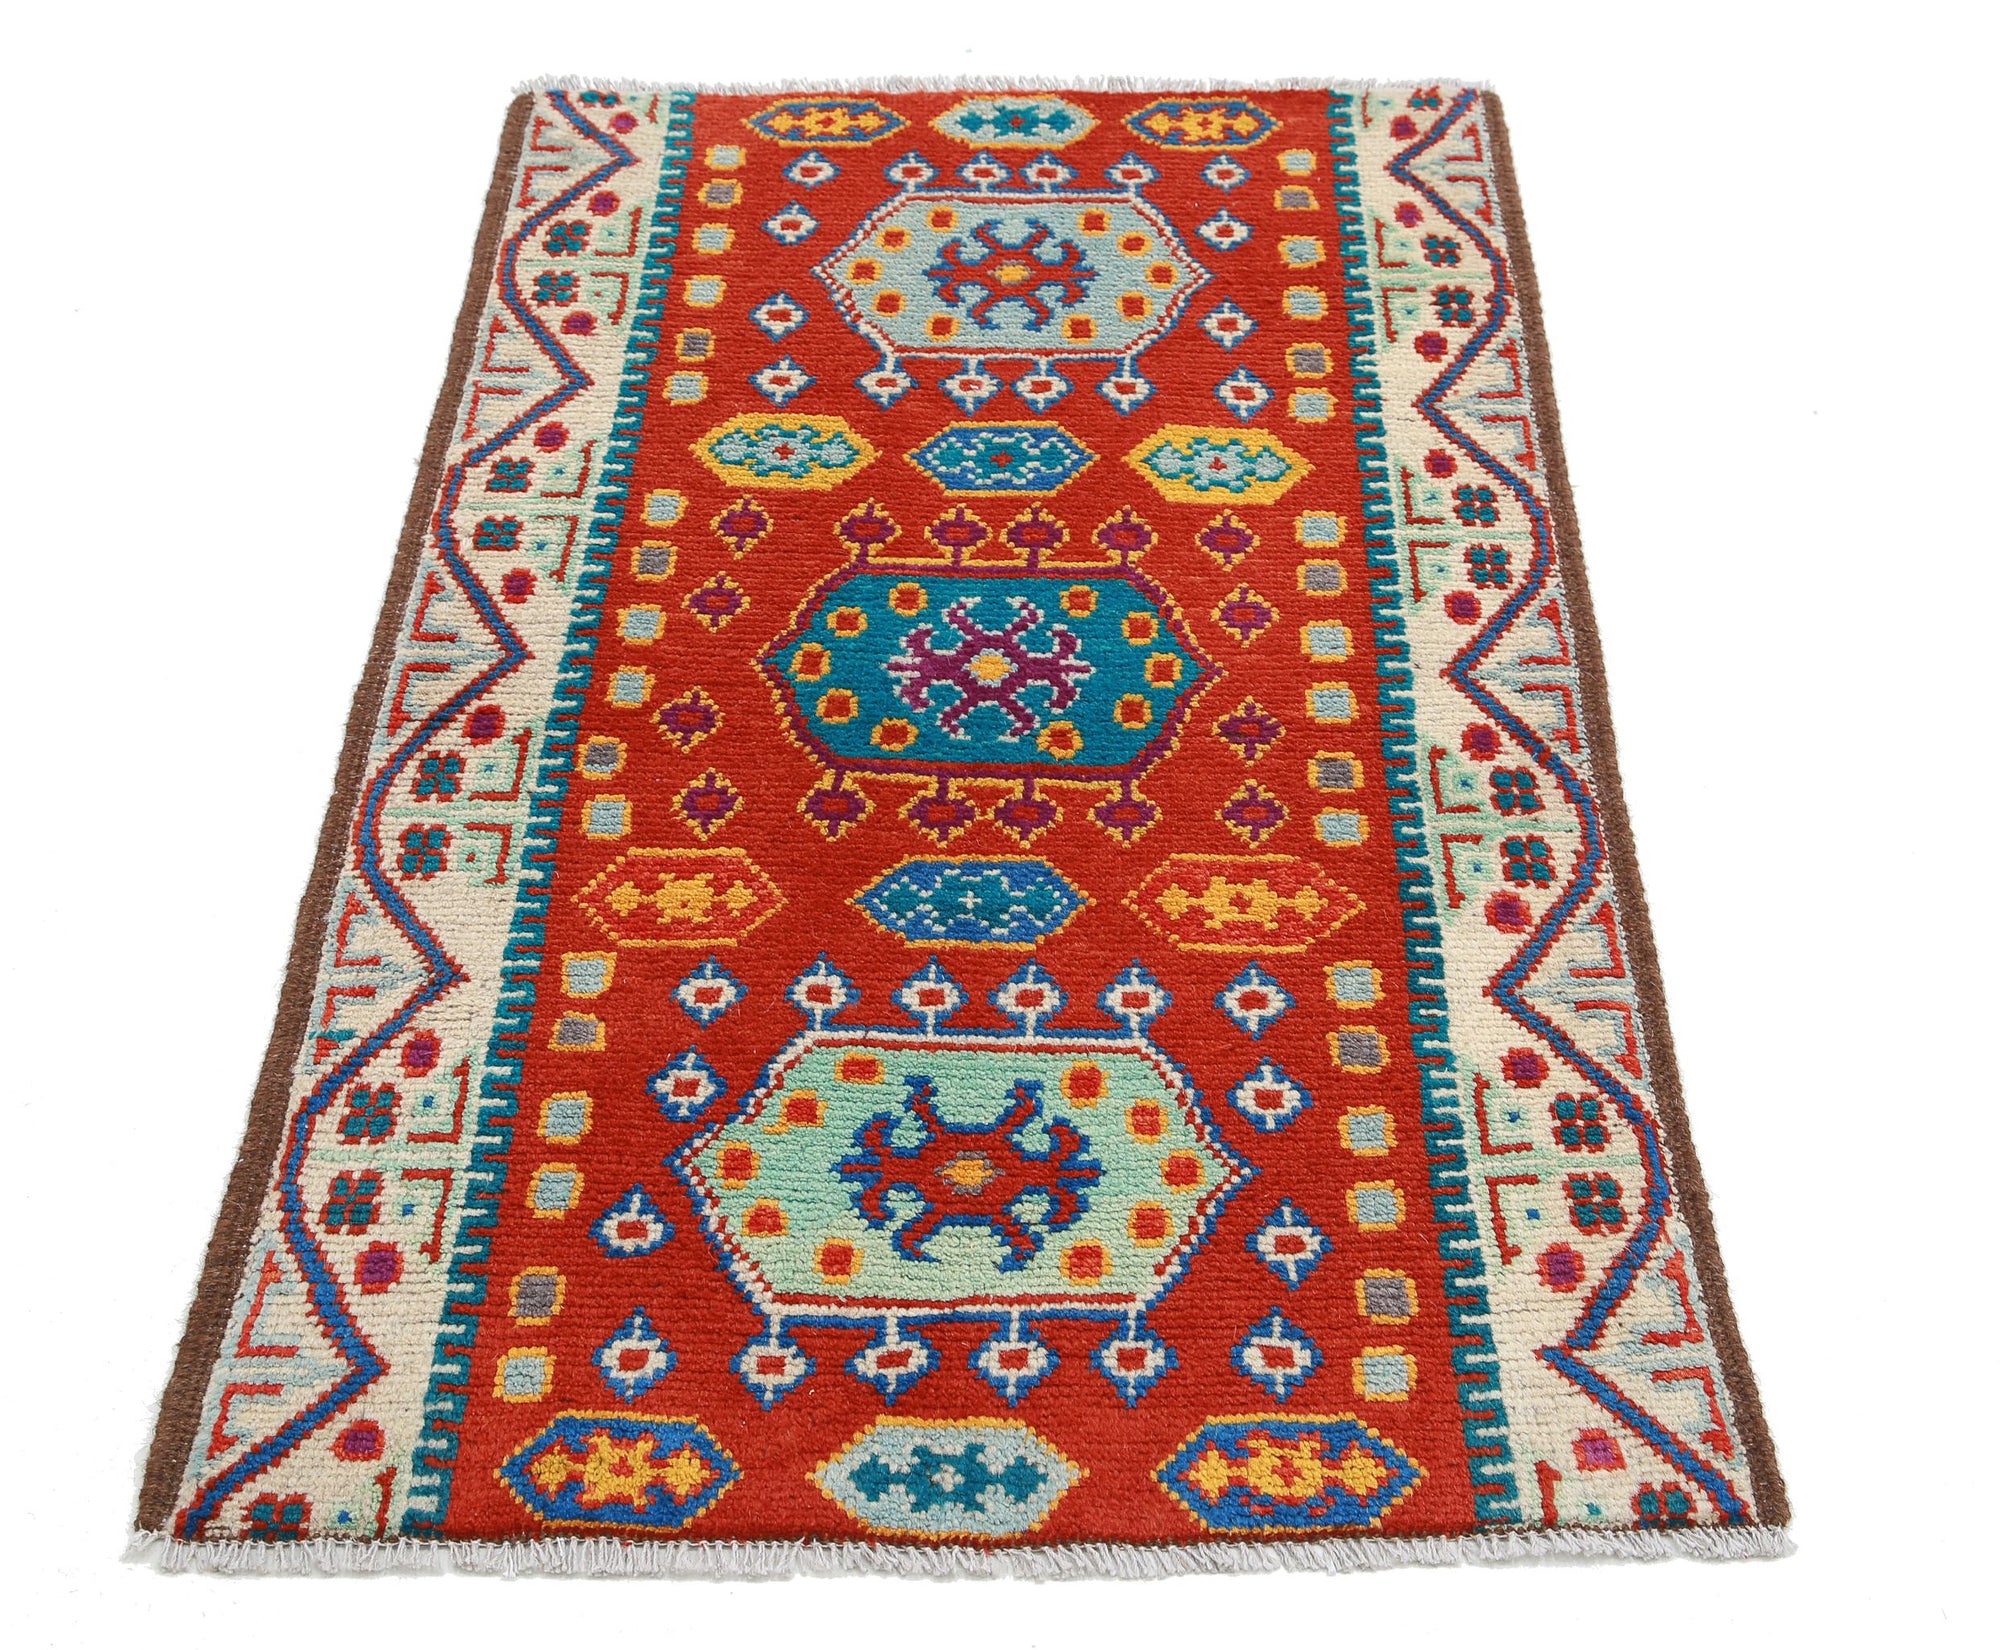 Revival-hand-knotted-qarghani-wool-rug-5014188-3.jpg